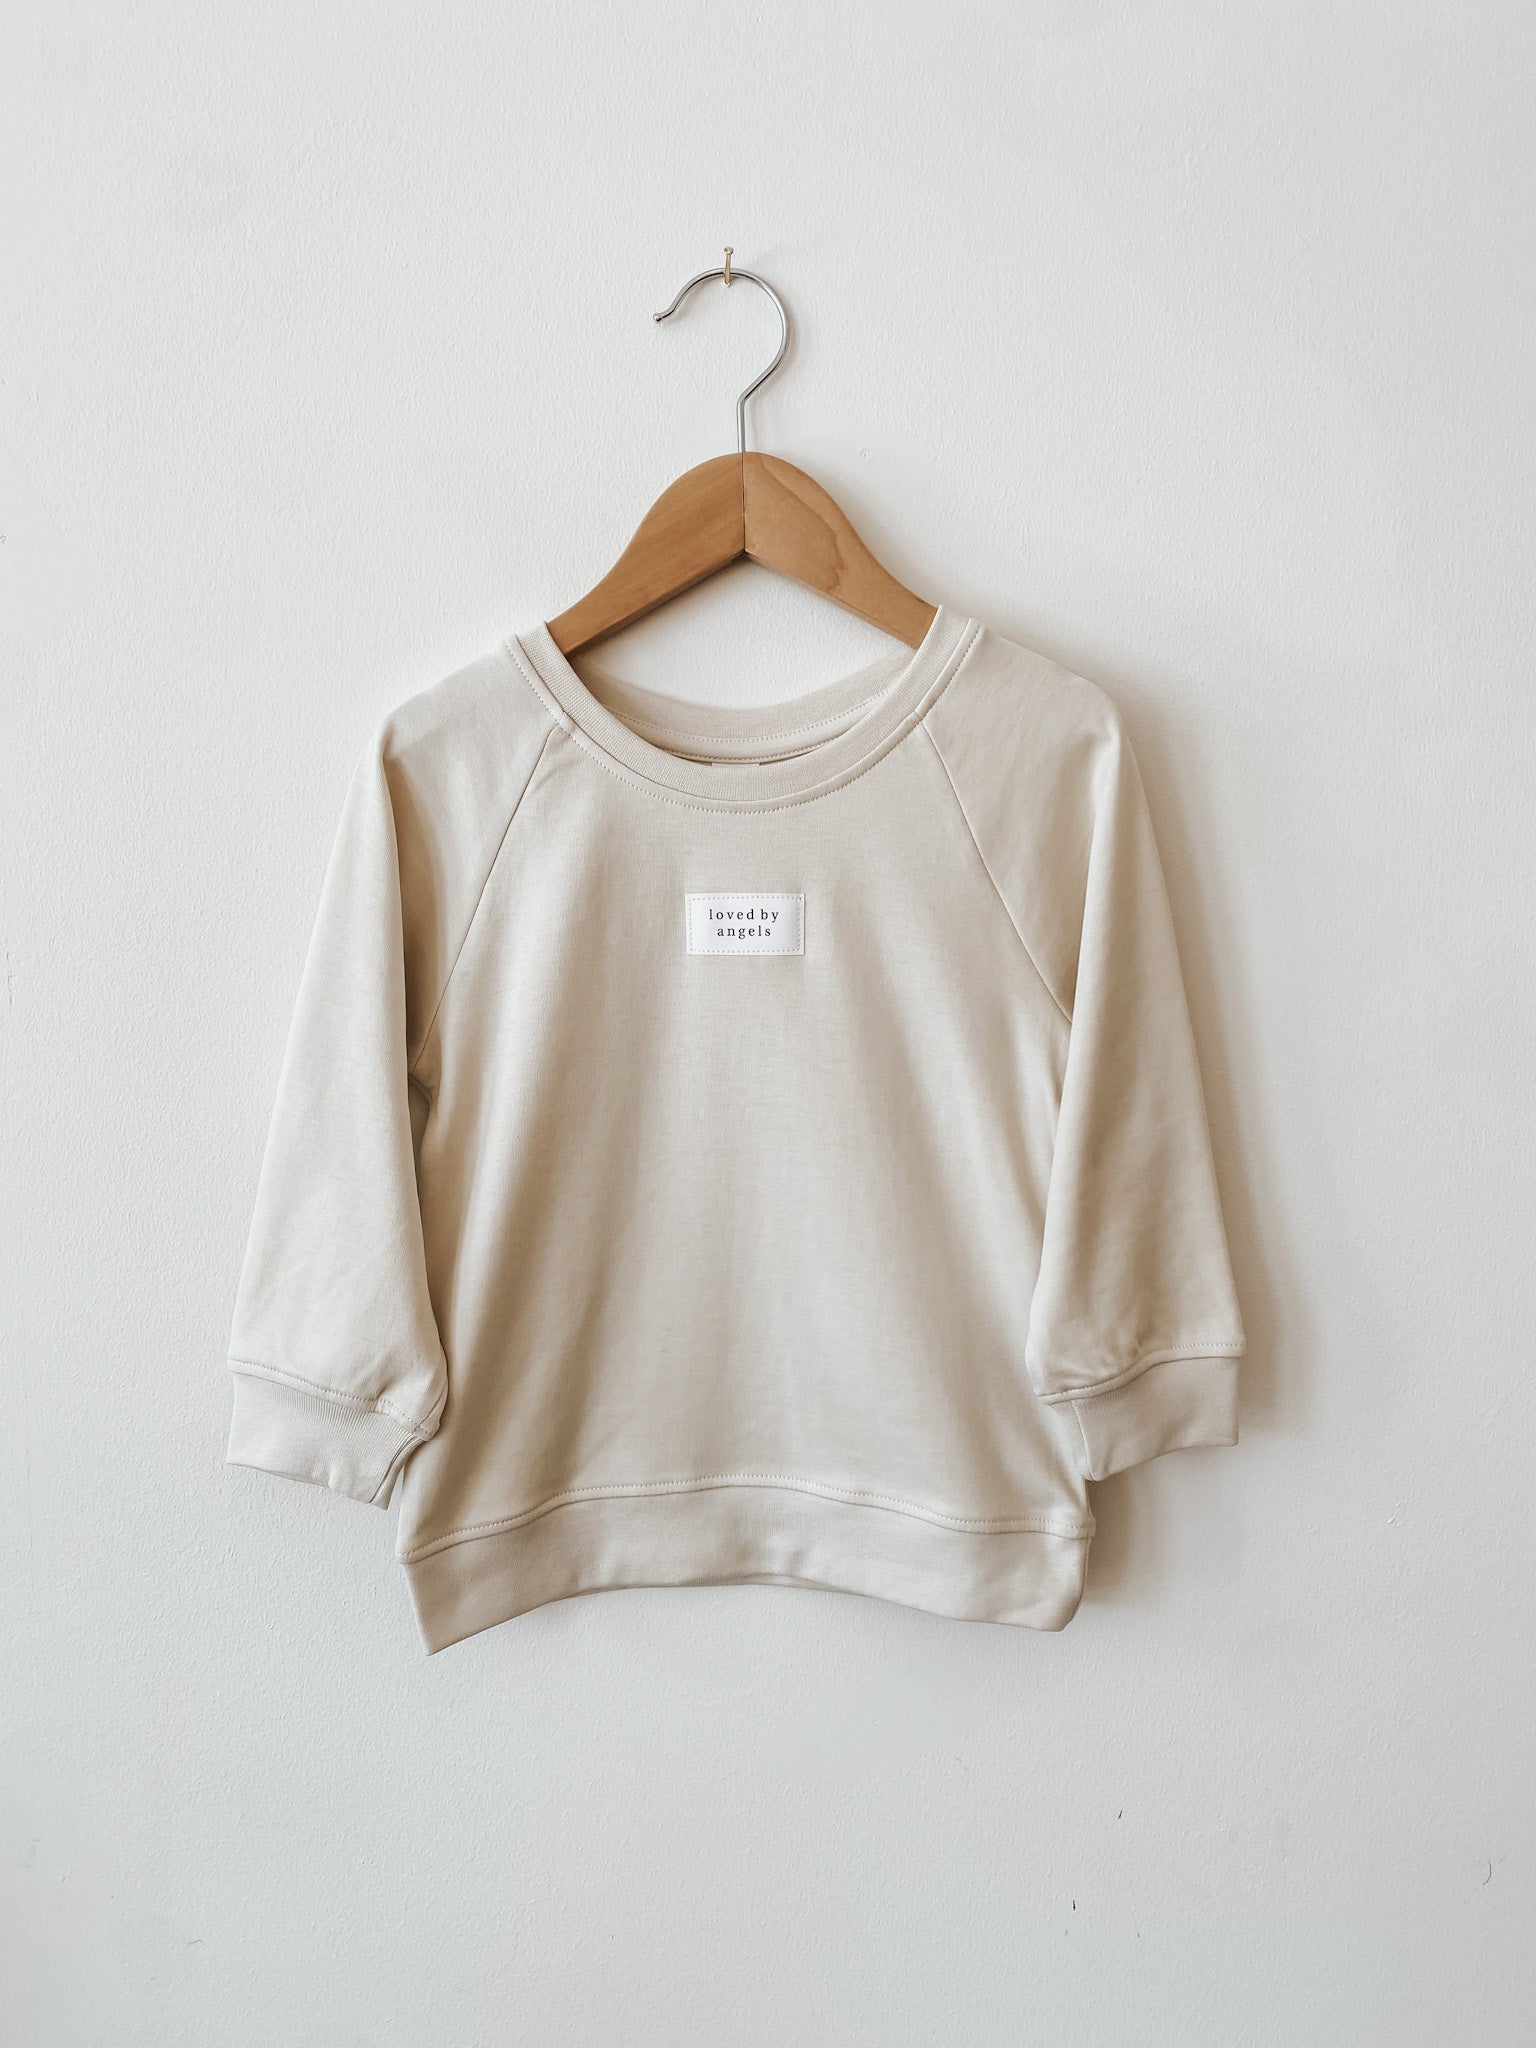 Classic Crewneck | Loved By Angels